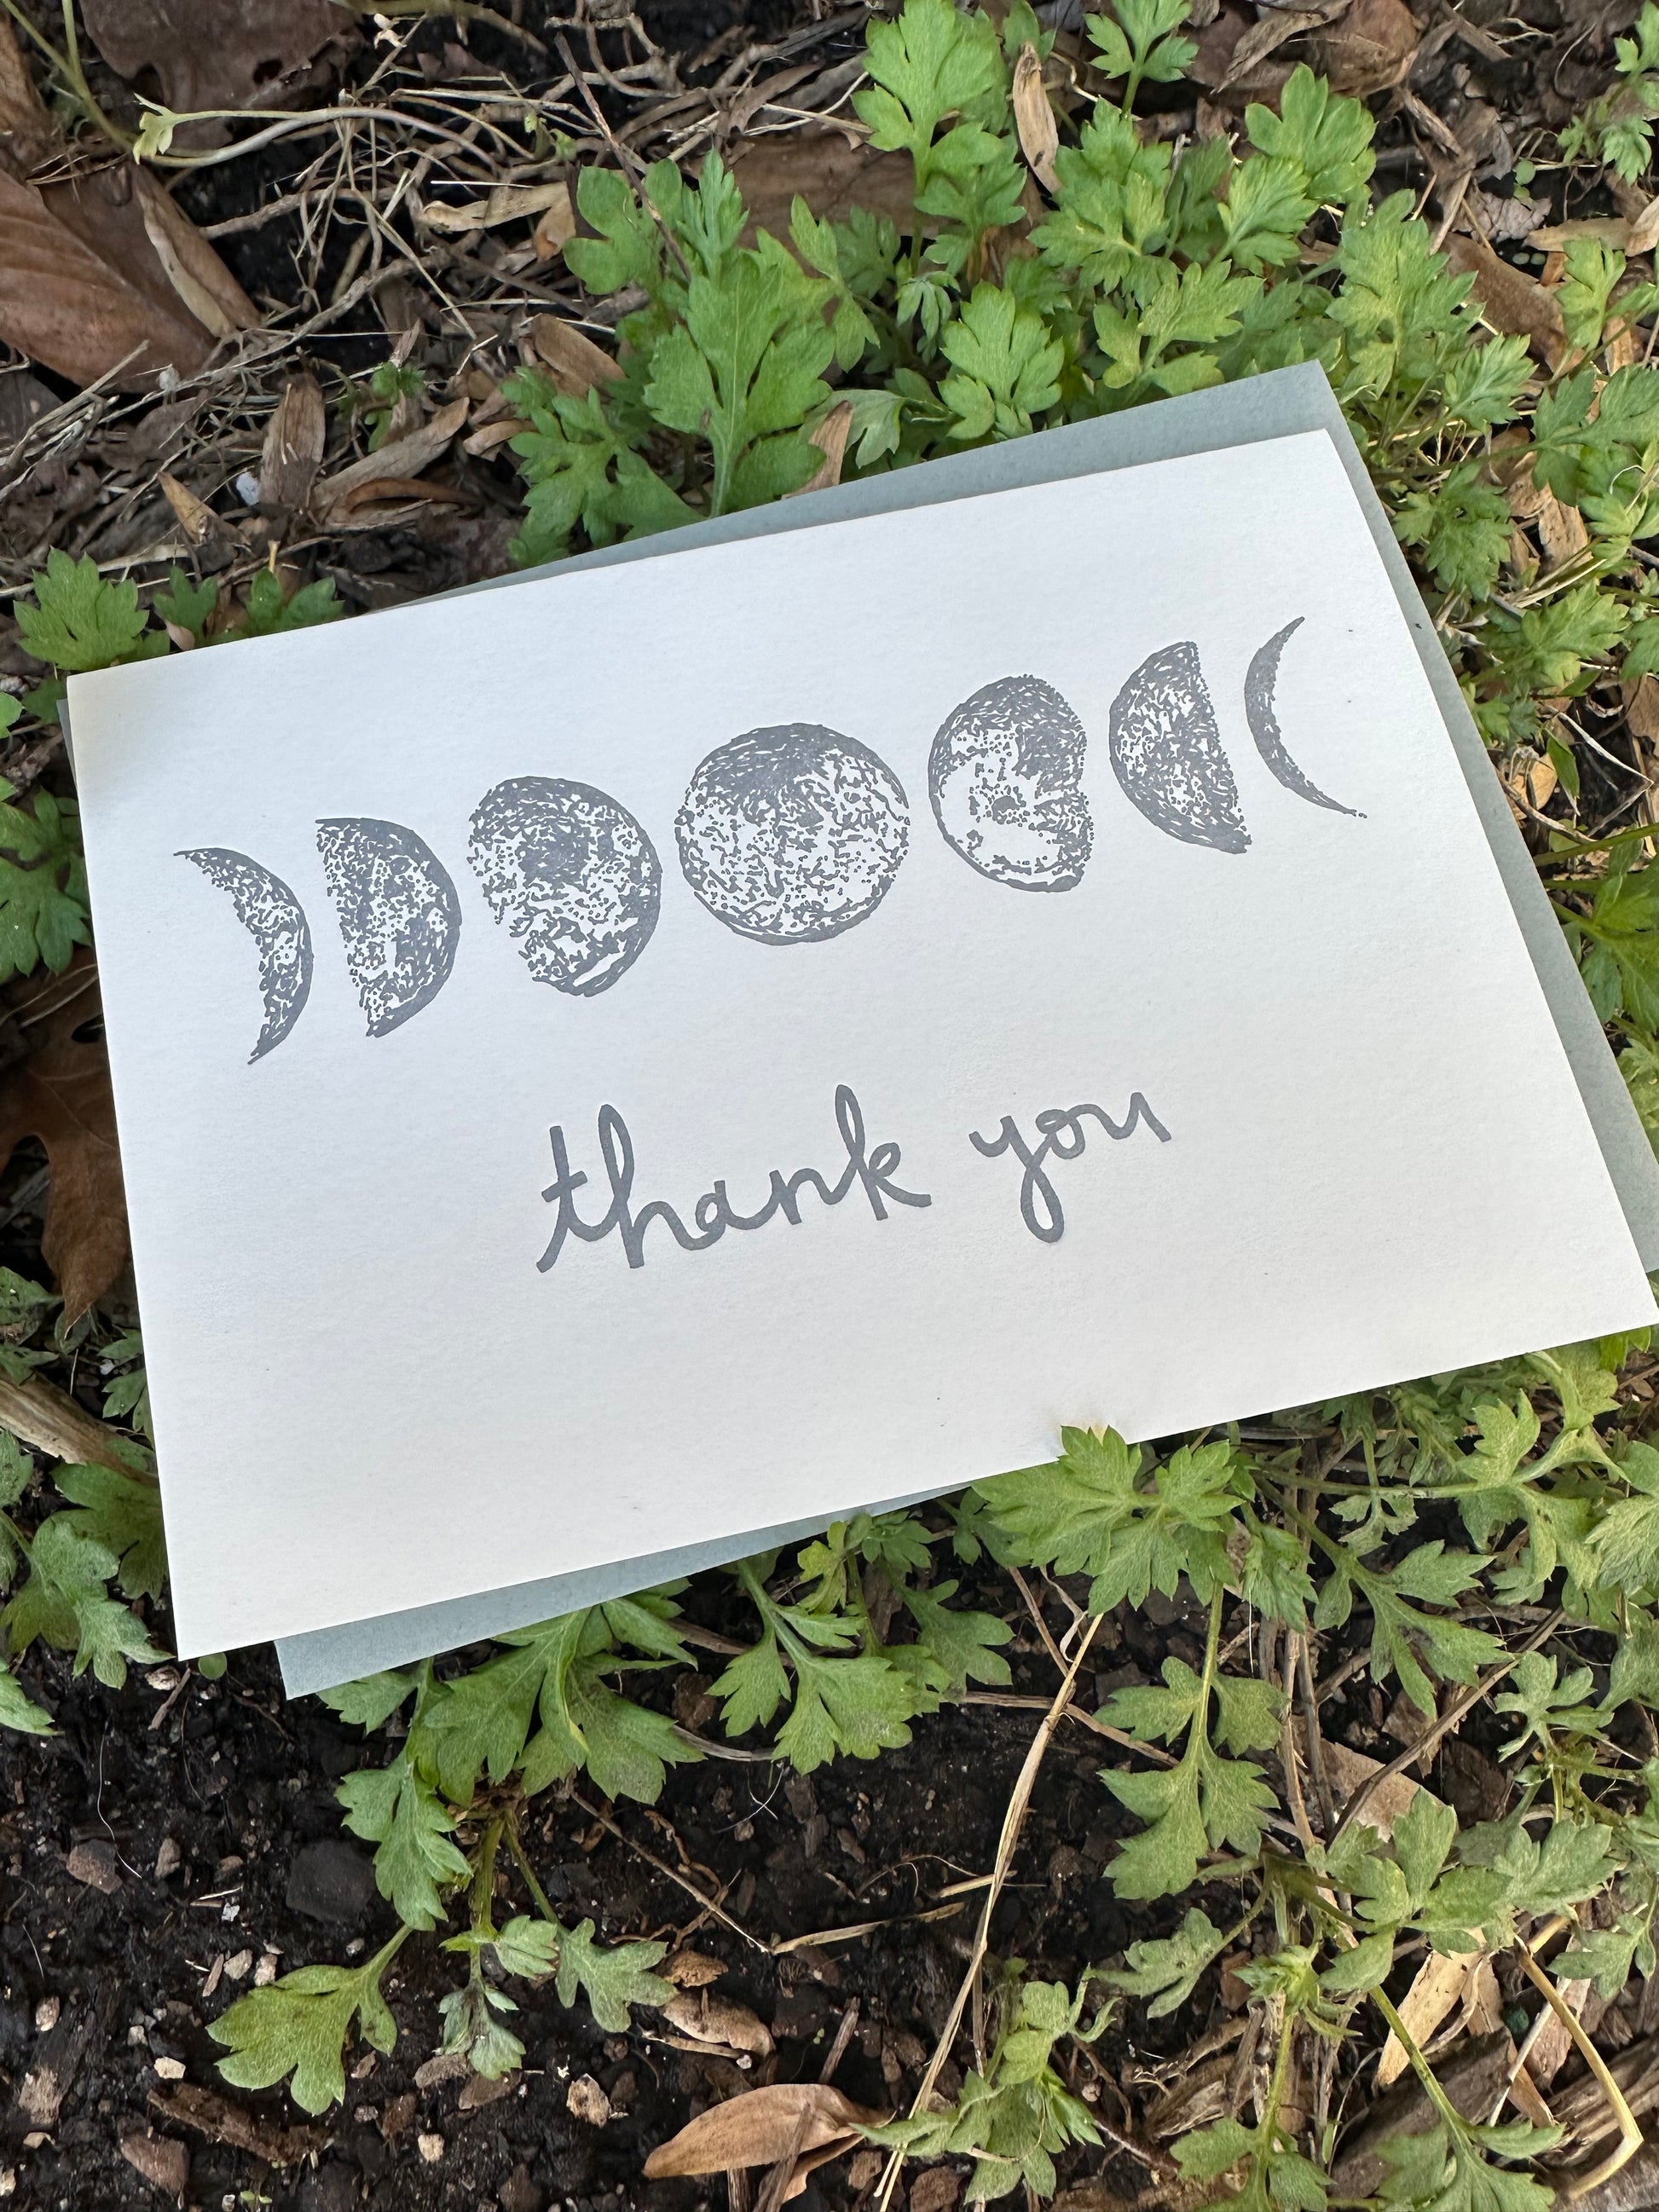 Letterpress greeting card featuring hand-drawn phases of the moon, printed in a shimmery silver ink. Whimsical hand-drawn text saying "Thank you" is shown centered on the card, in the same silver ink. The card is white, blank inside, and is paired with a slate gray envelope. The card is shown outside on a bed of mugwort.